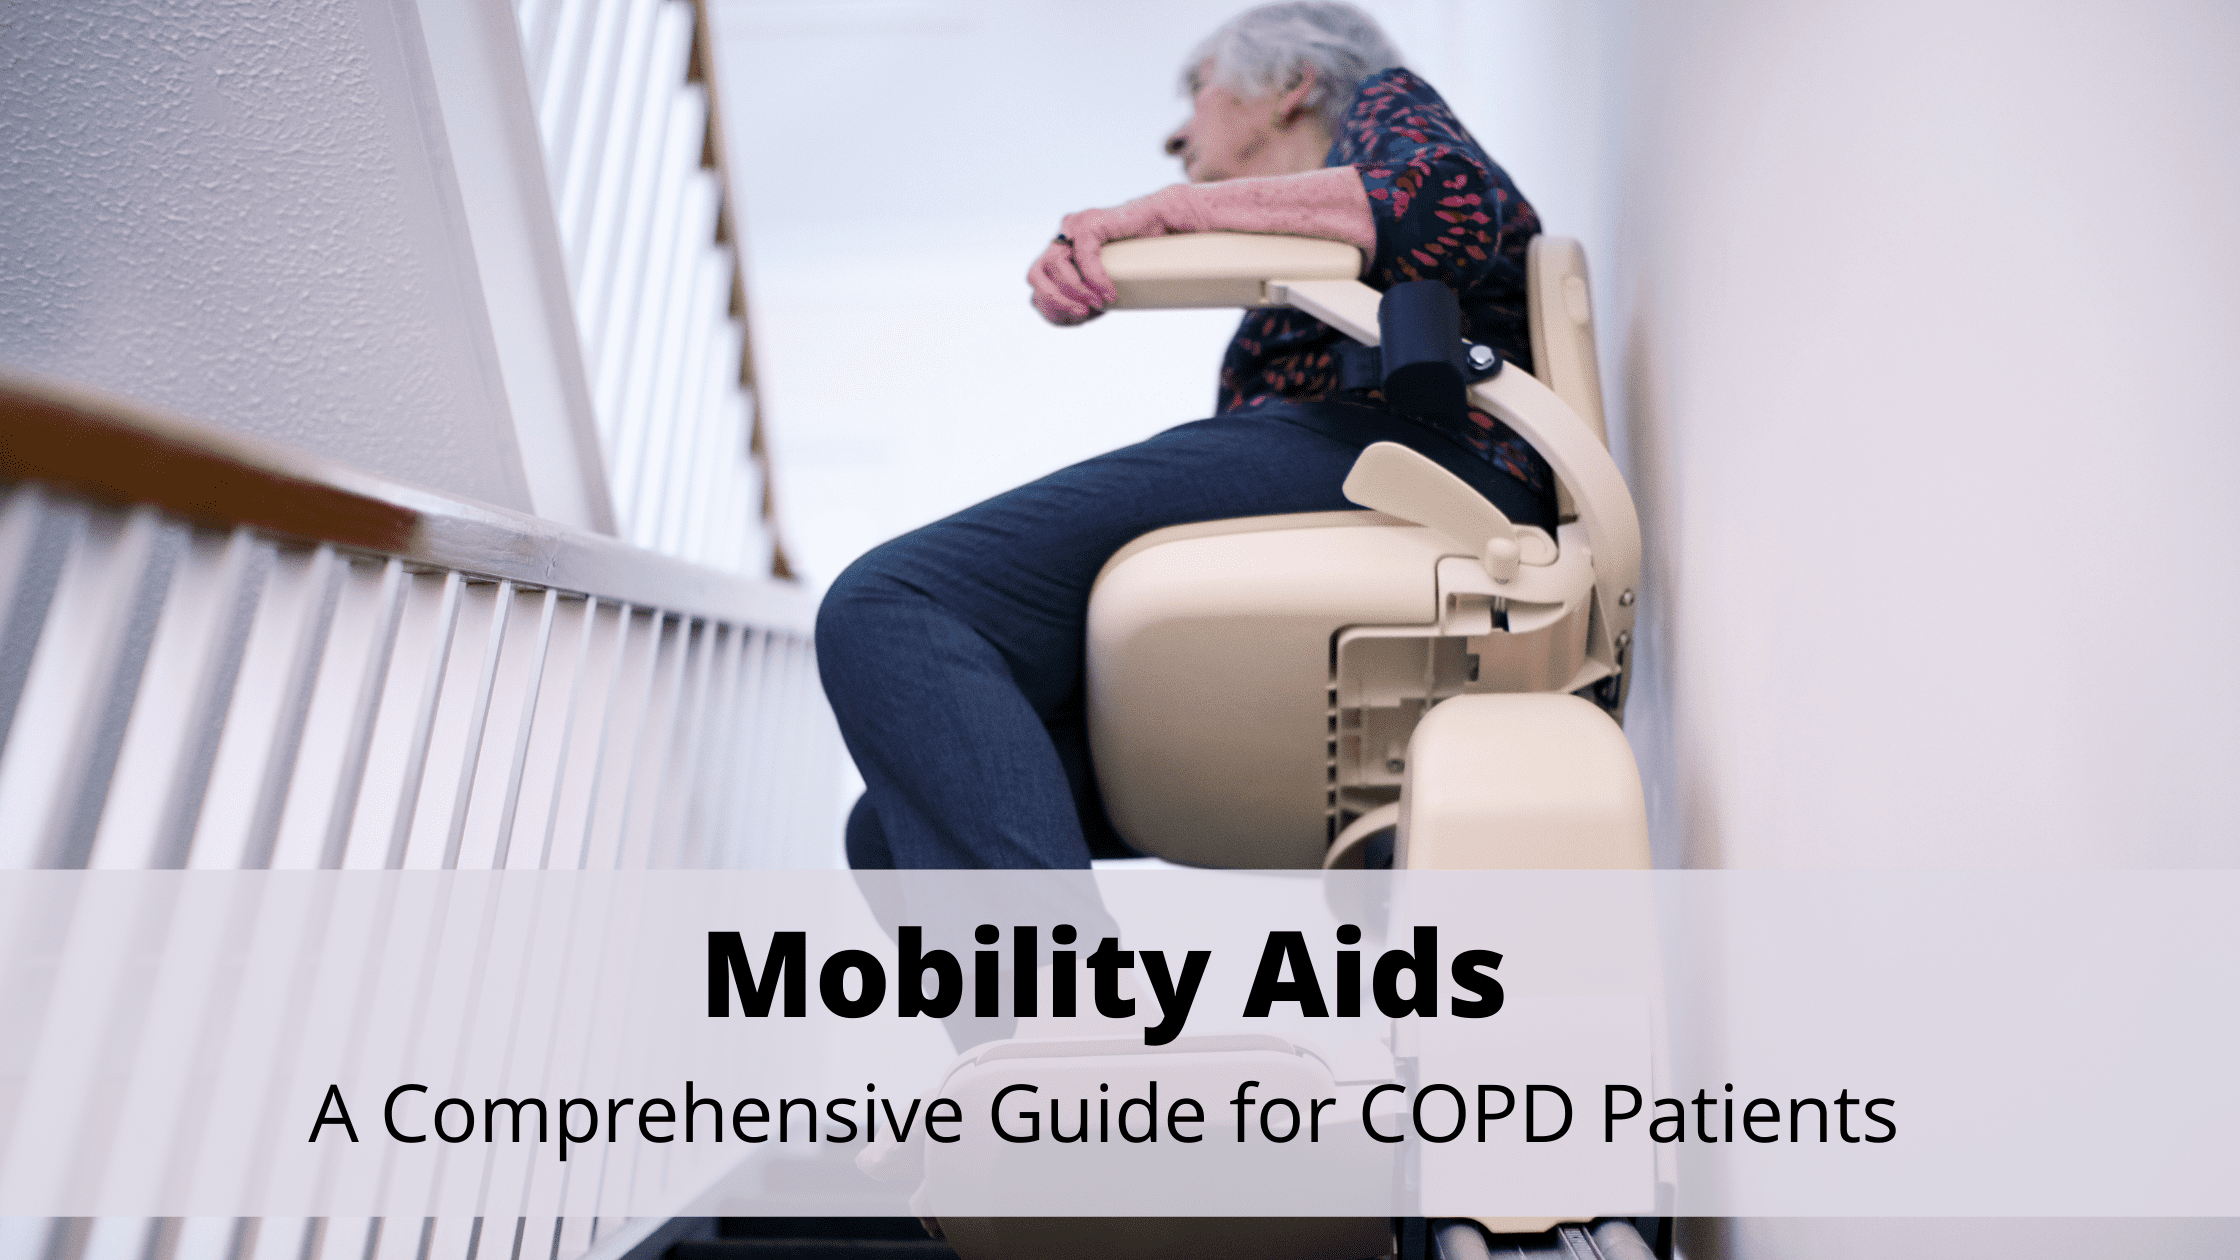 Mobility Aids: A Comprehensive Guide for COPD Patients